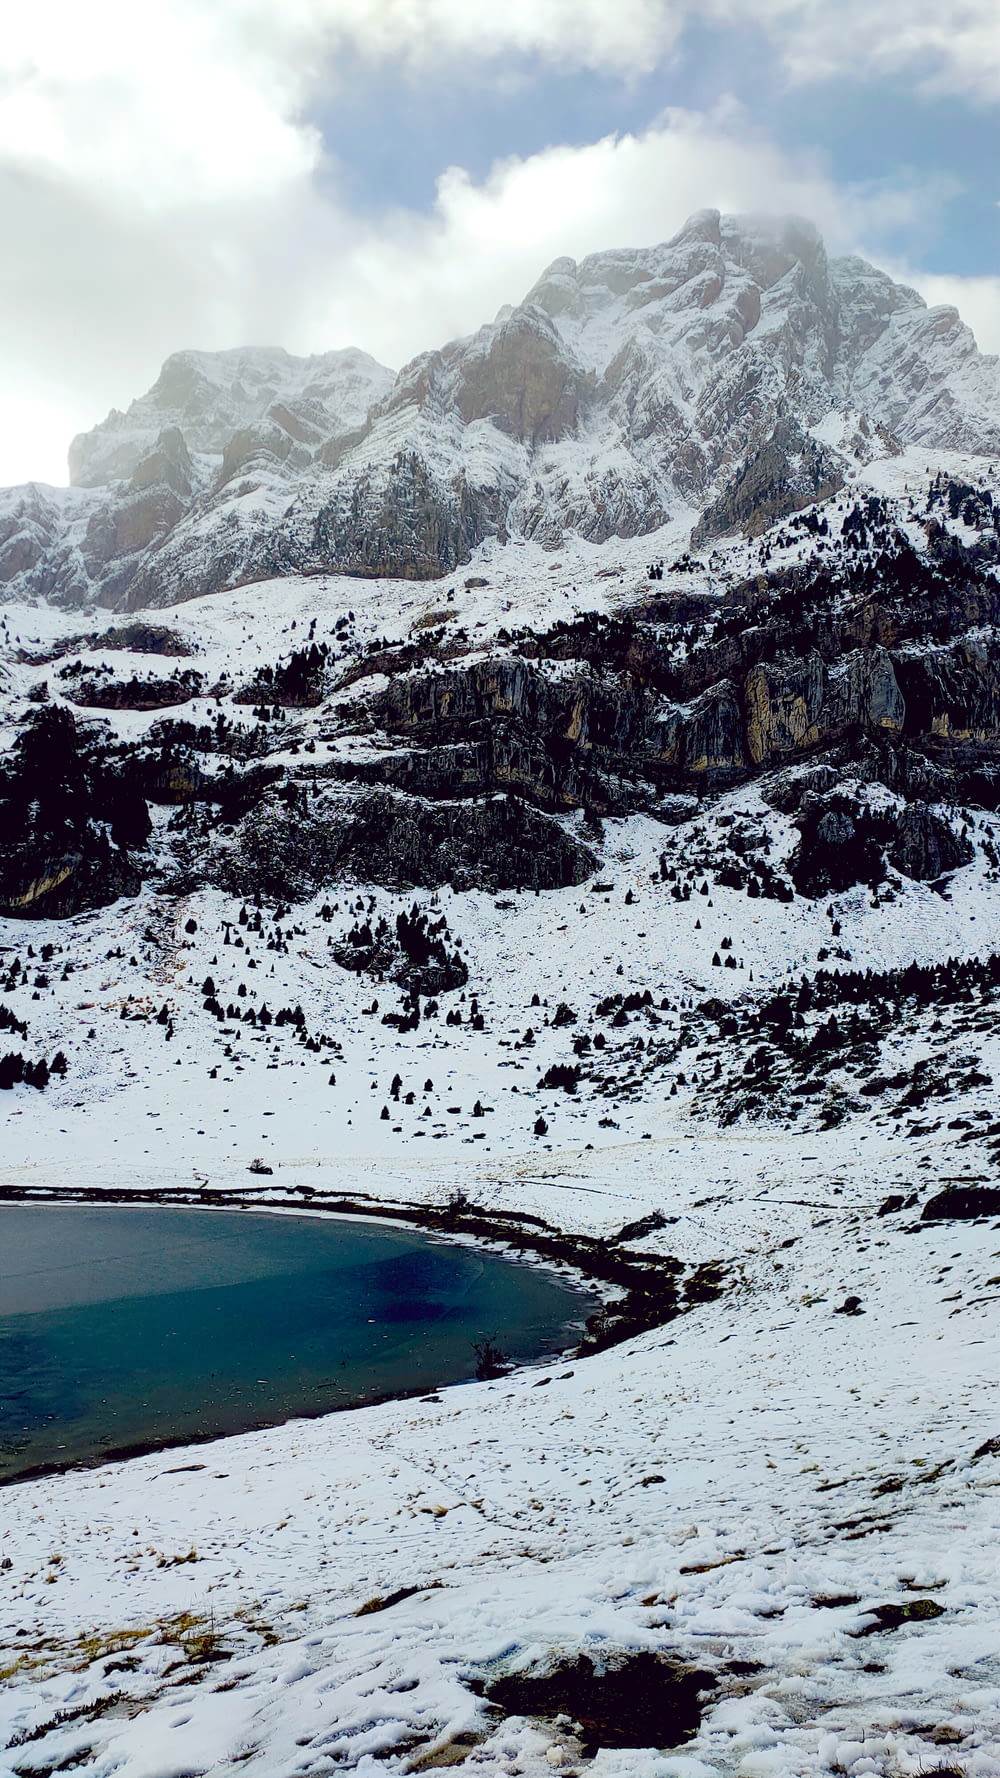 a snow covered mountain with a lake in the foreground